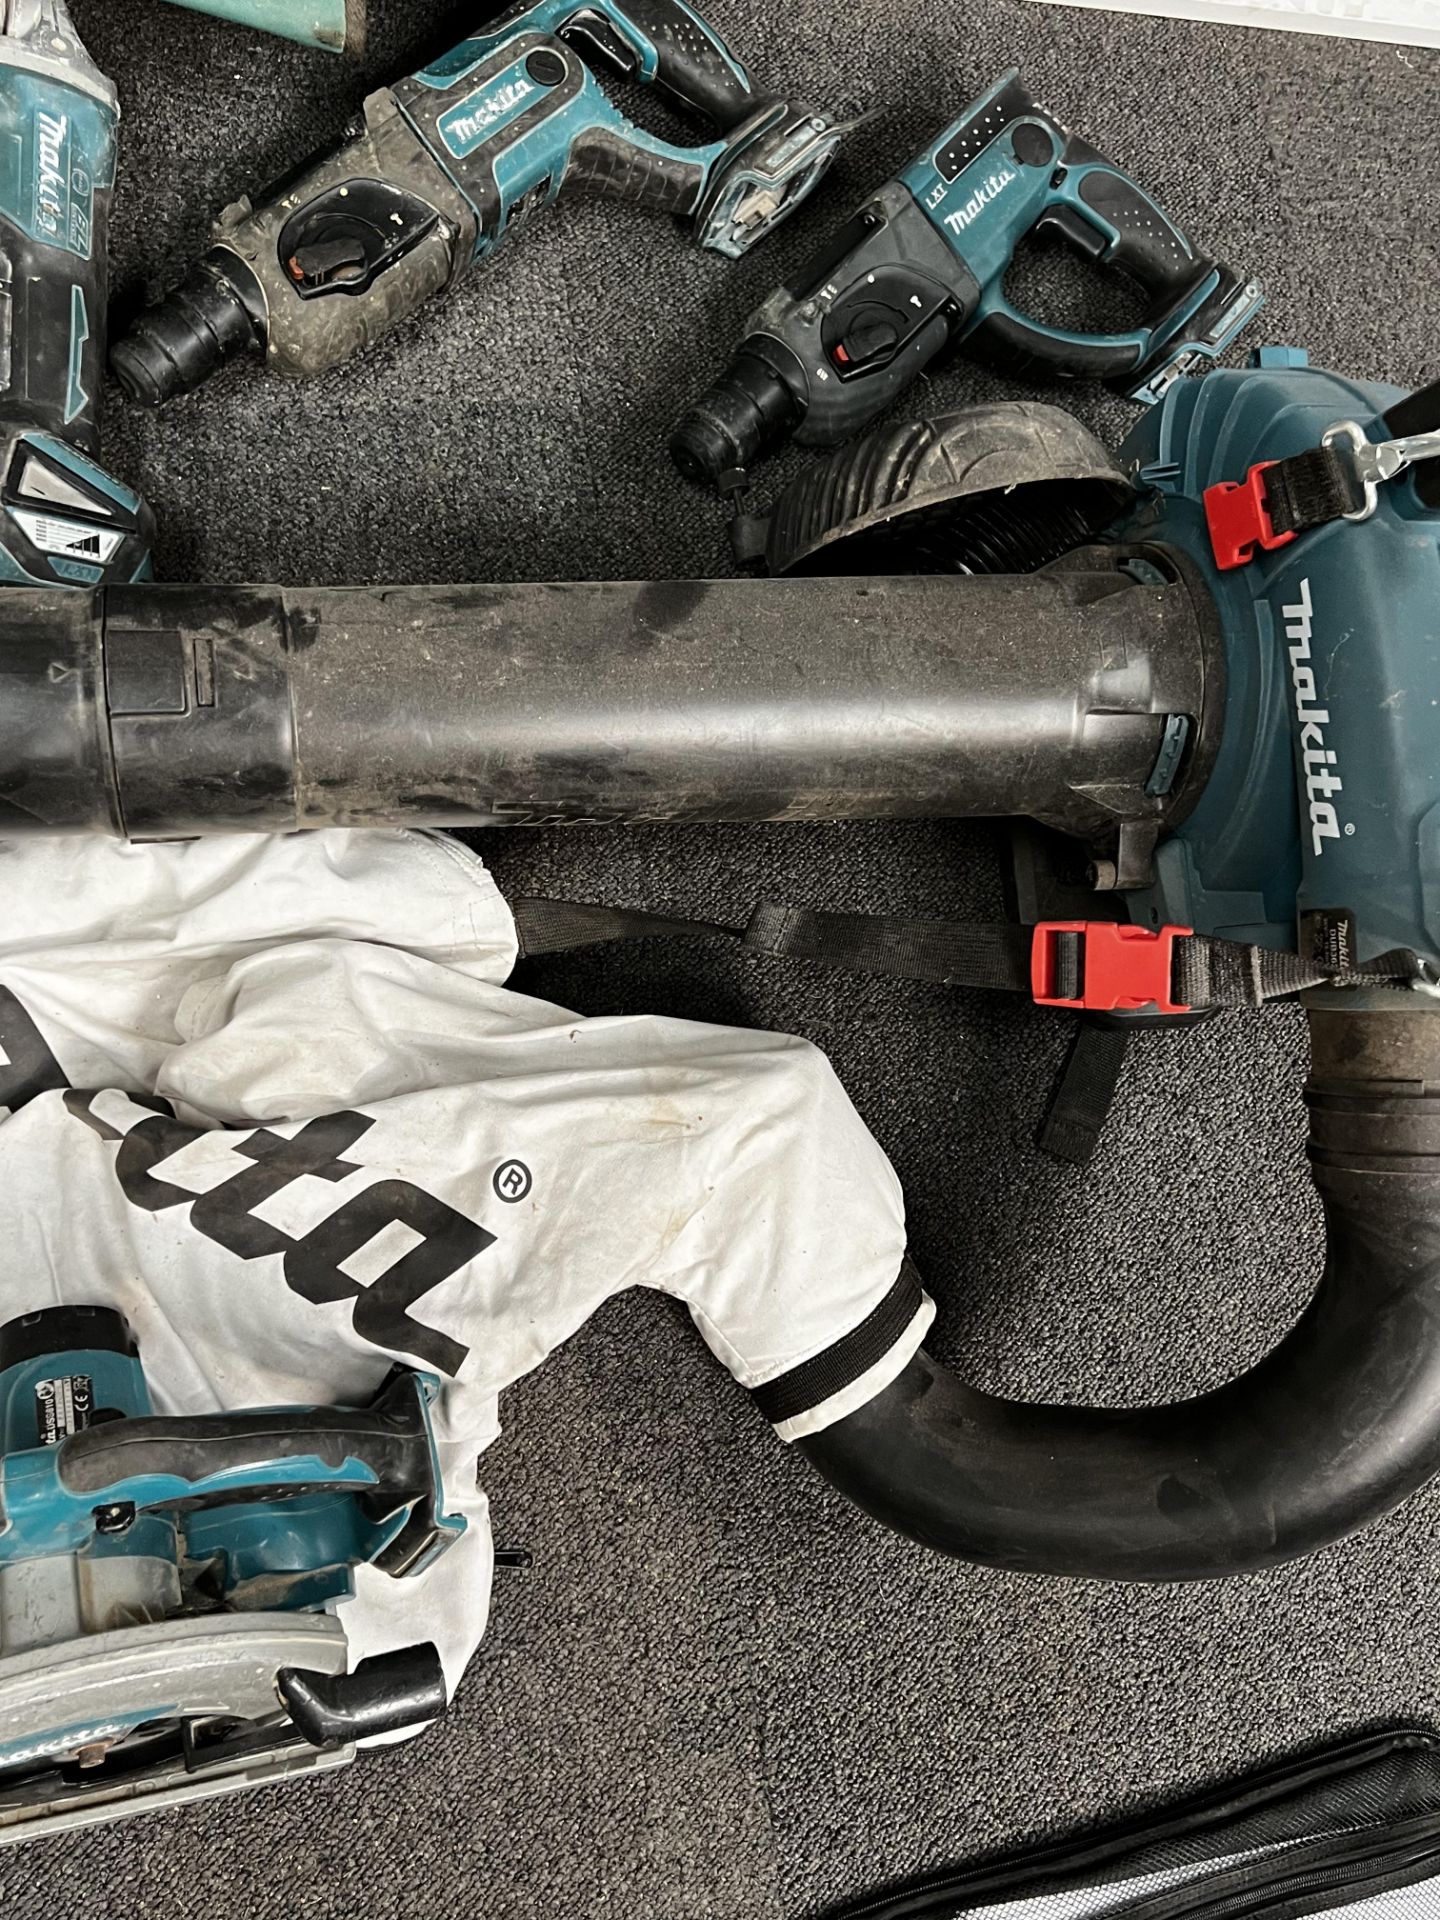 Makita rechargeable power tools as shown in photos - Image 3 of 5